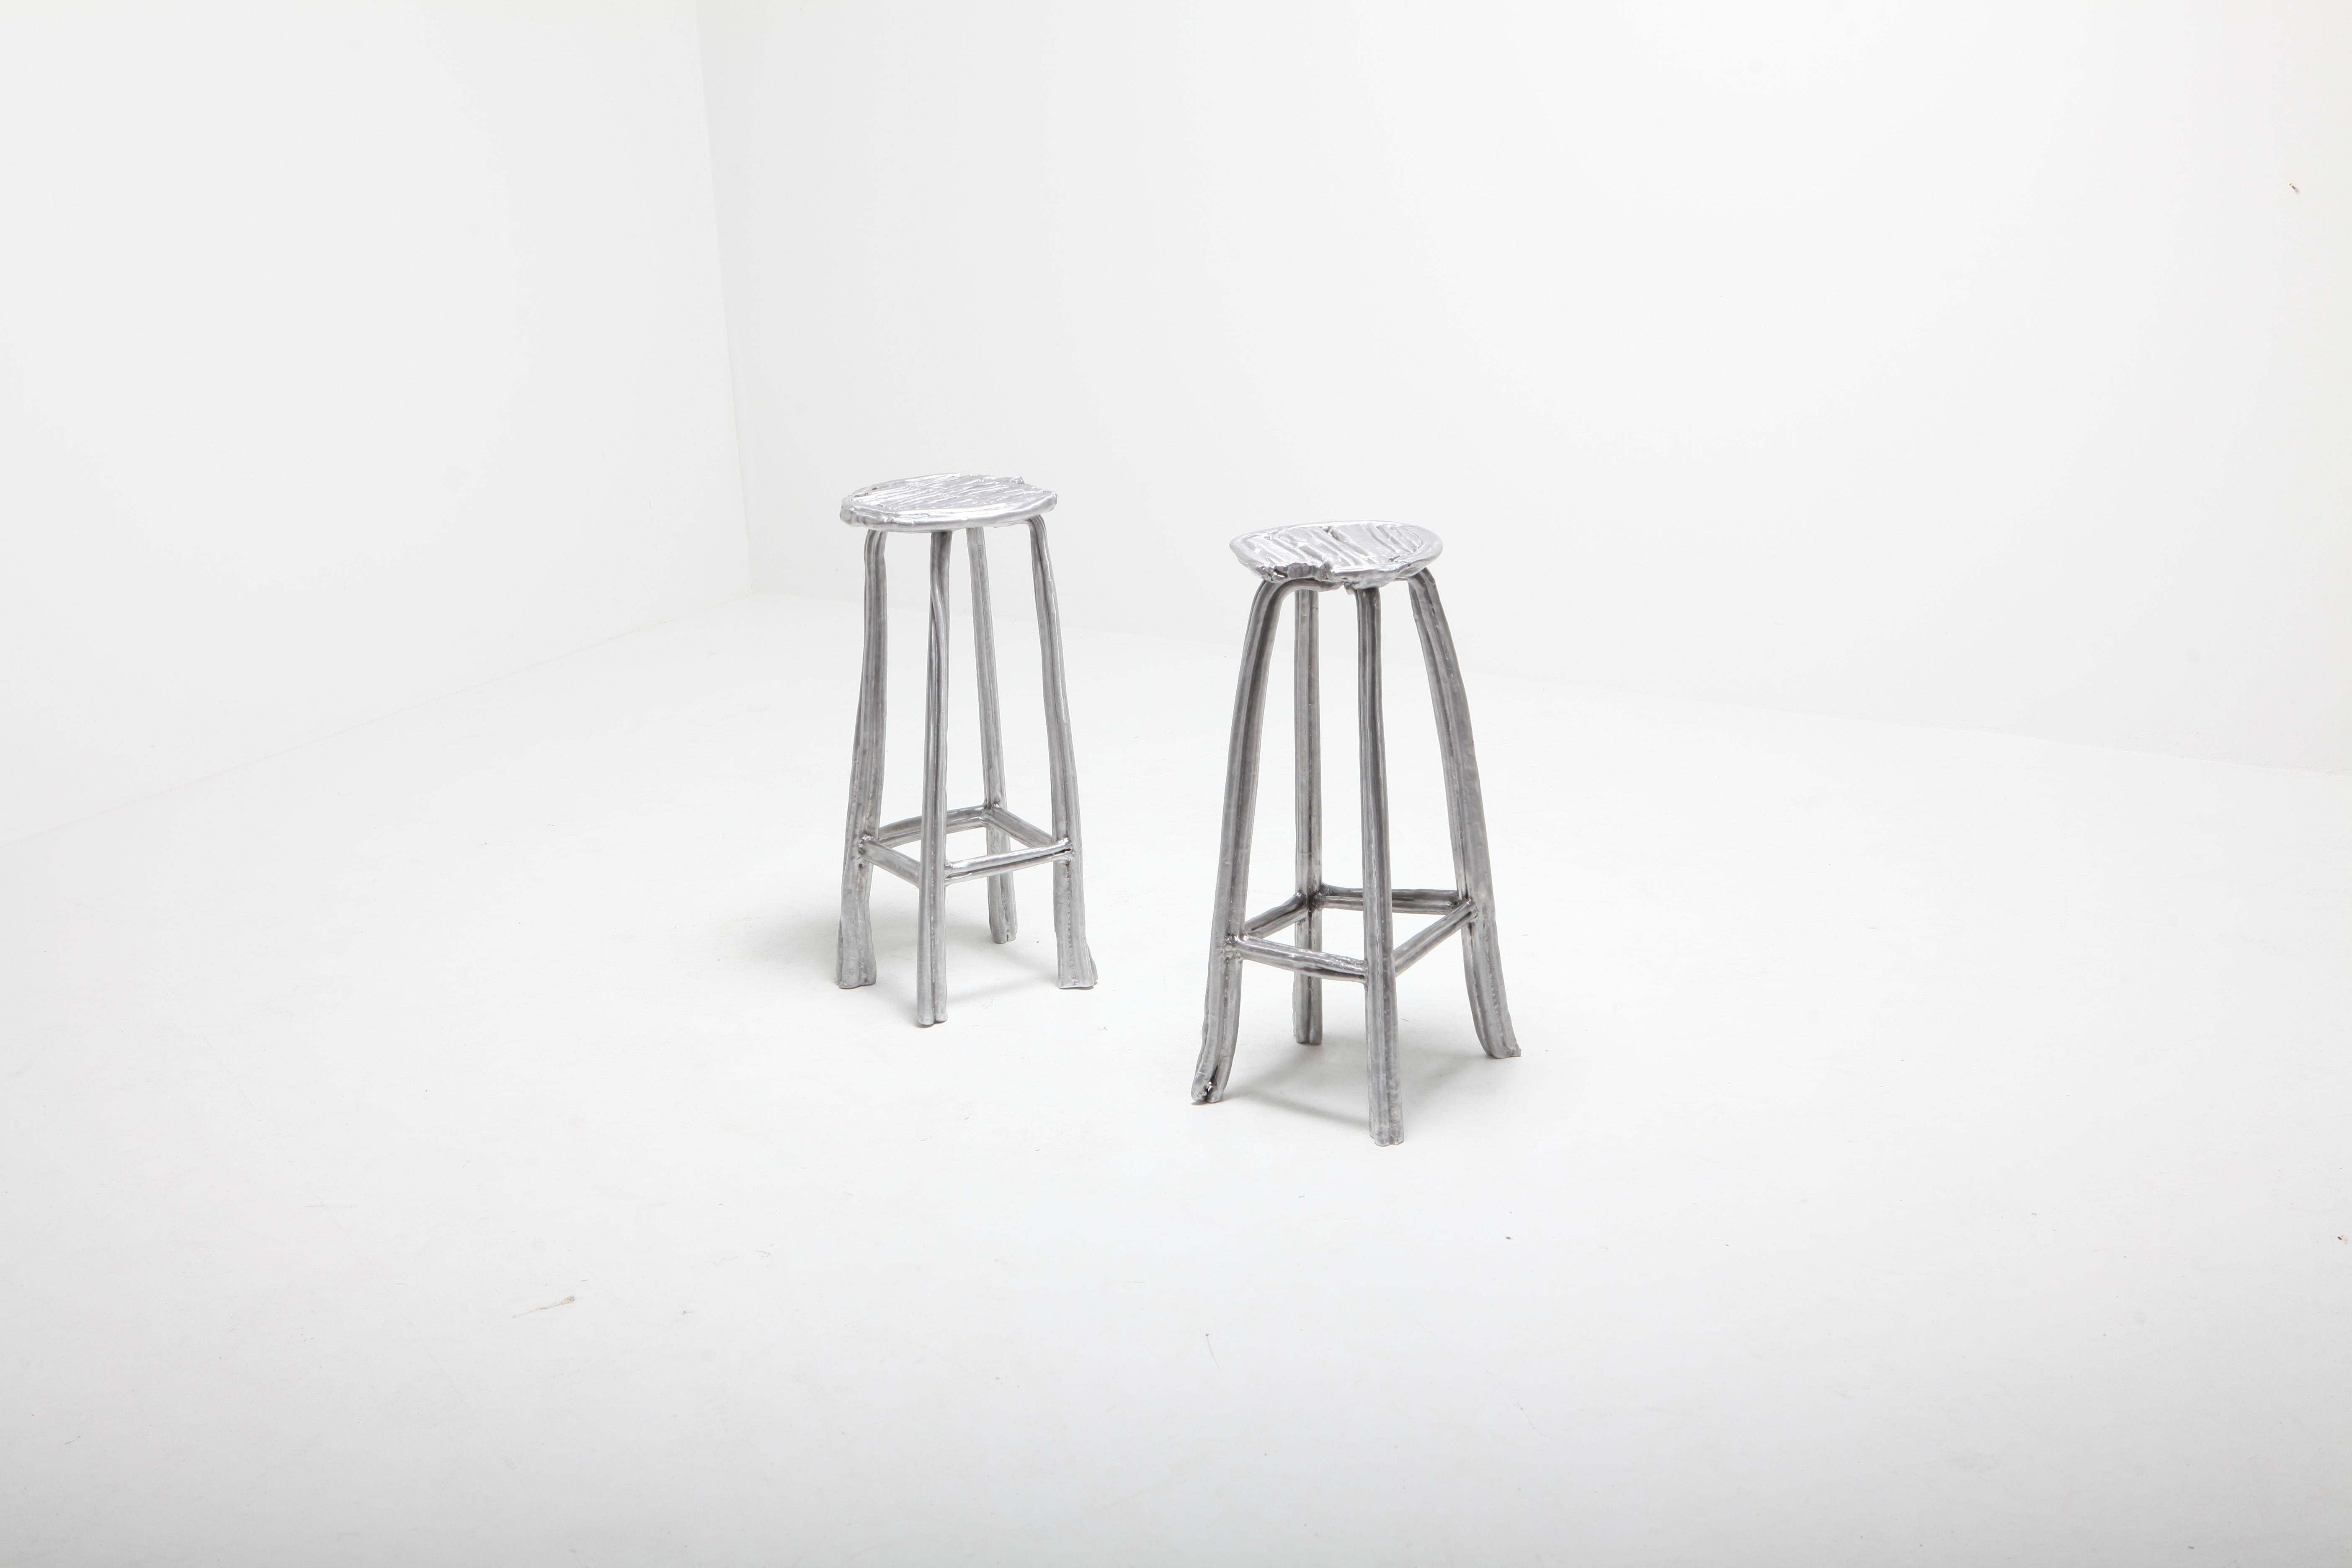 Set Of 2 Bar Stools by Studio Nicolas Erauw
Unique piece. Limited Edition 1 of 1.

Dimensions: 
- H 70 cm x Ø 33 cm
- H 70 cmx Ø 35 cm

Materials: Aluminum, wax dipped

Part of the on-going ‘Wax on/Wax off series’. These series are a collection of